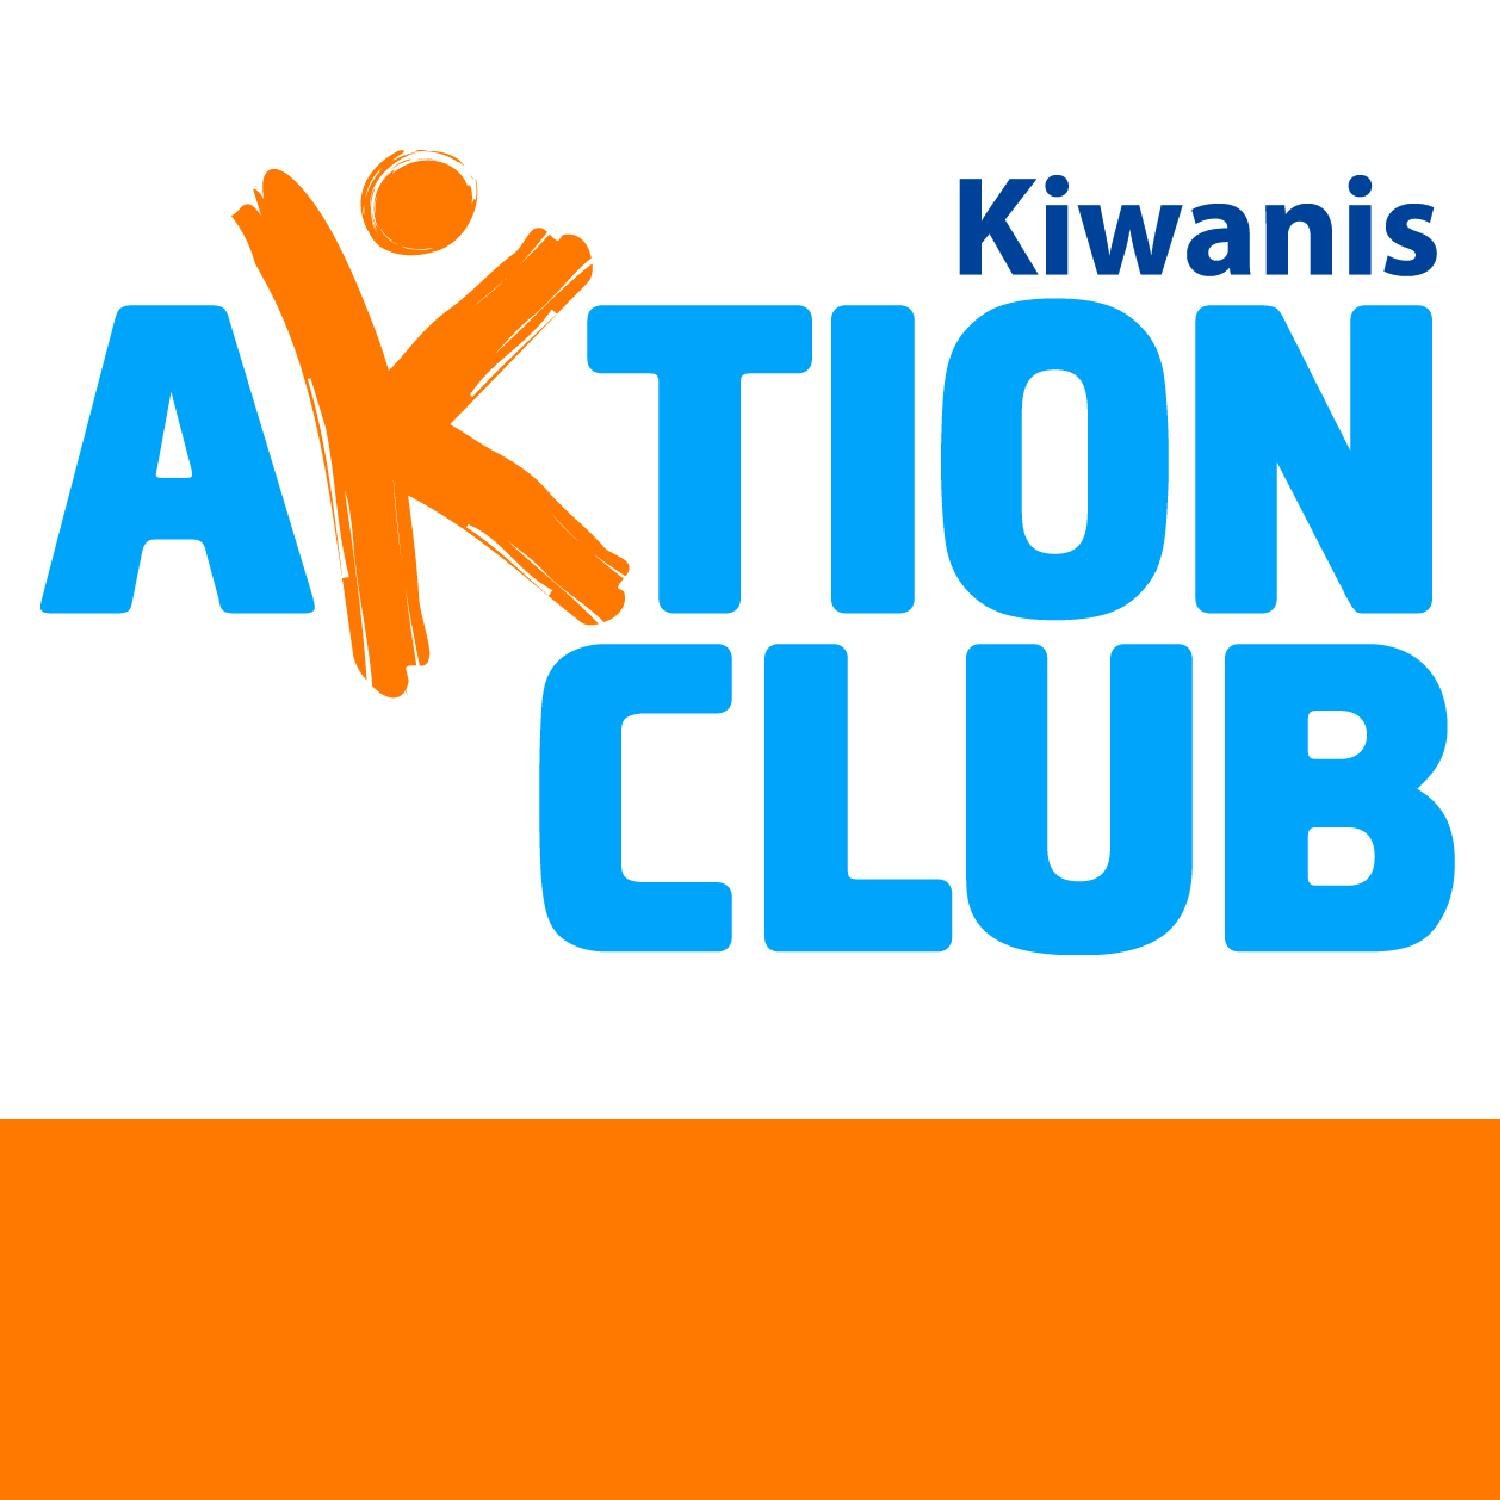 Aktion Club is the only service club for adults with disabilities, with more than 12,000 members worldwide. We are proud members of the @Kiwanis family.